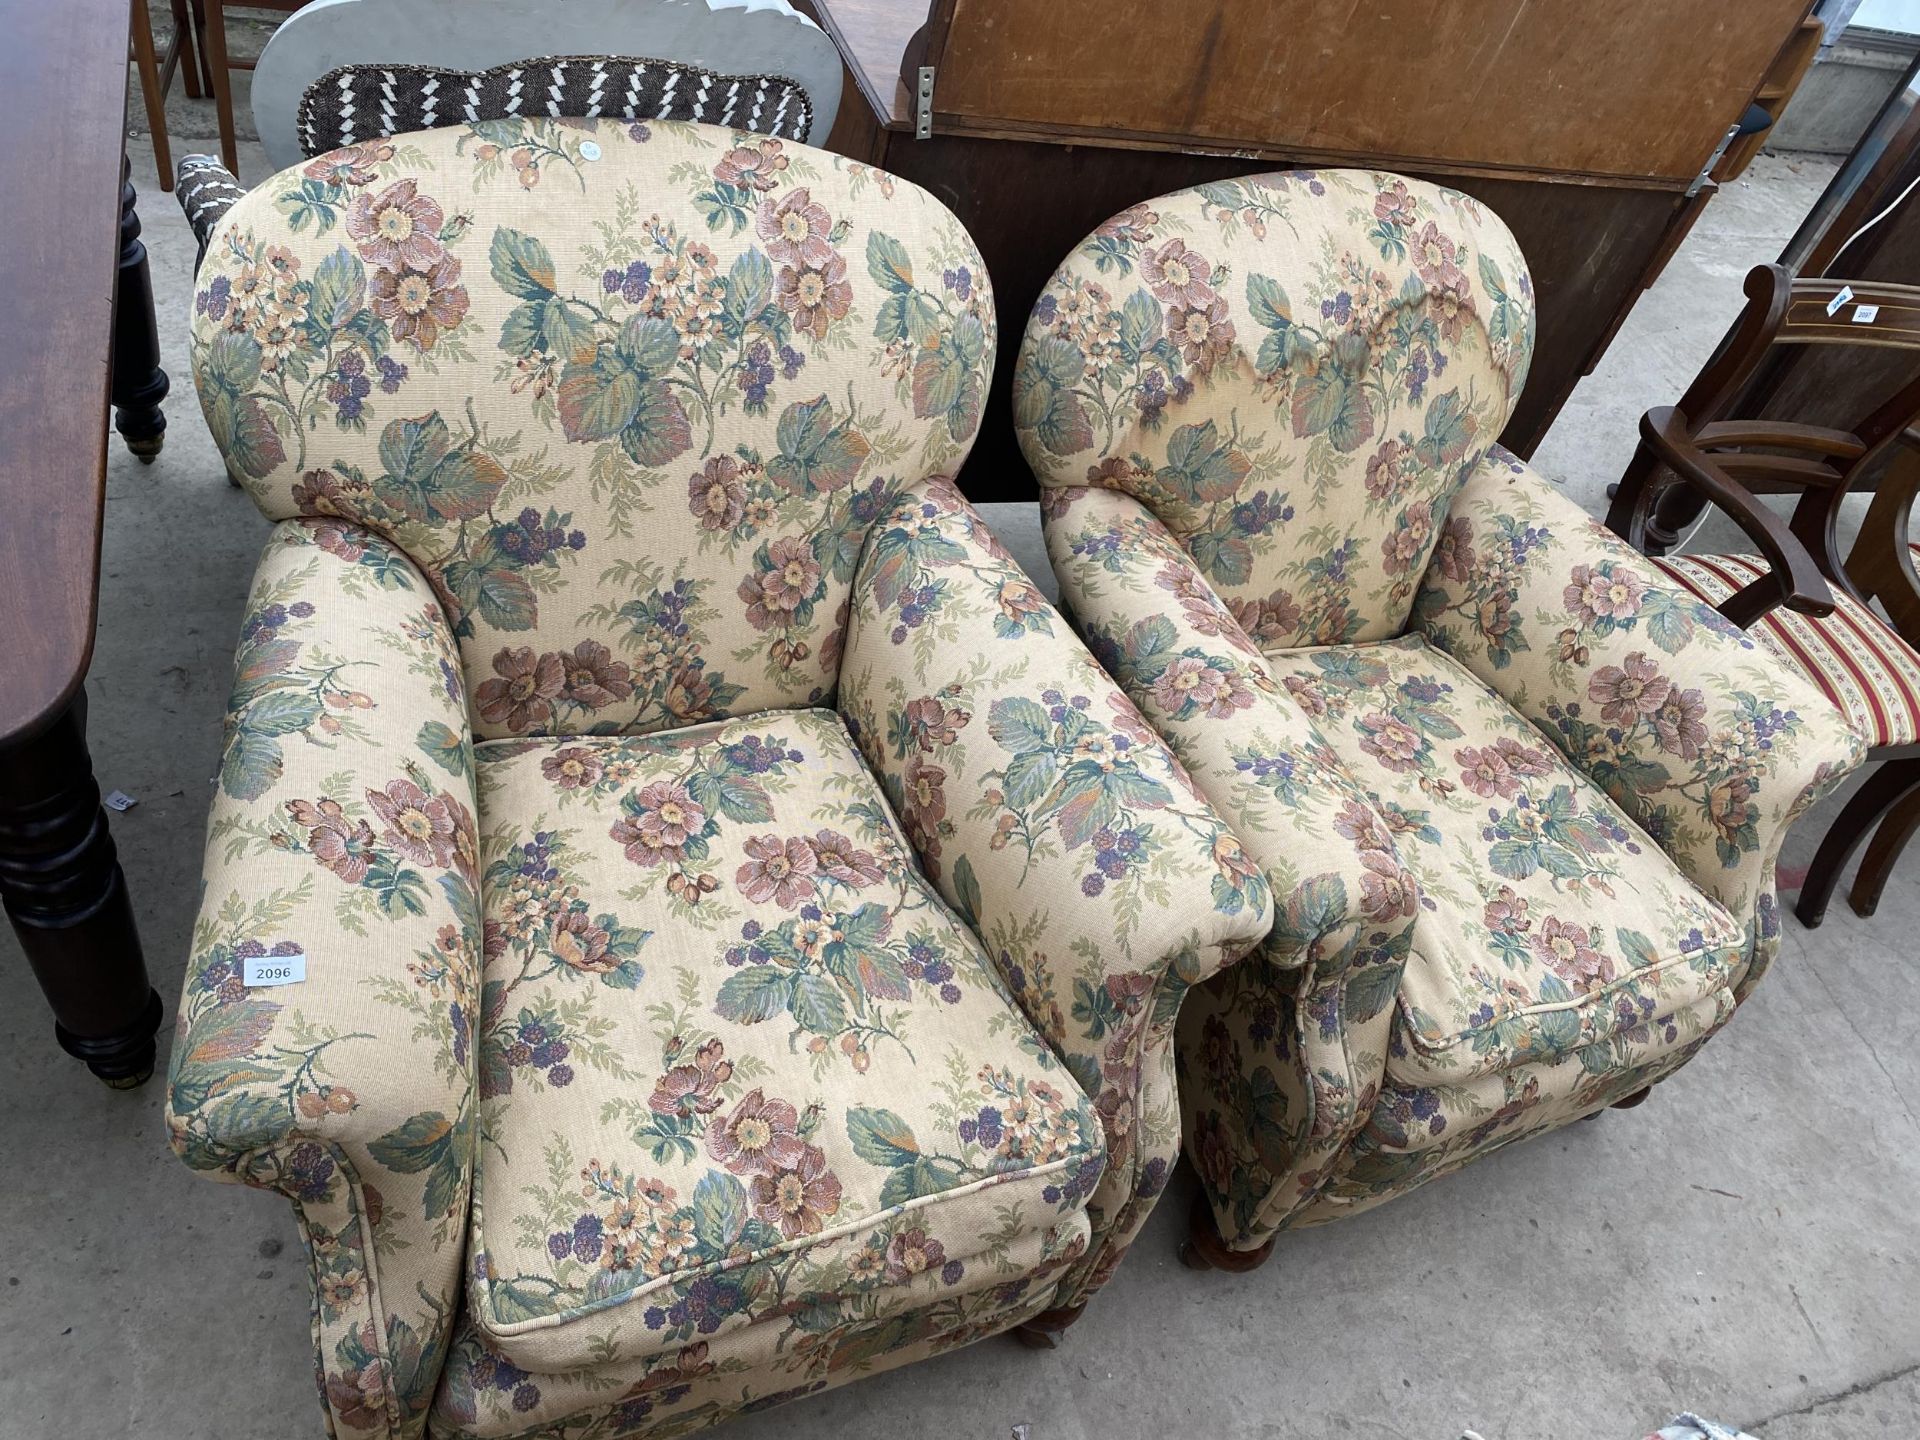 A PAIR OF EARLY 20TH CENTURY SPRUNG AND UPHOLSTERED EASY CHAIRS ON BUN FEET WITH A SPARE LOOSE COVER